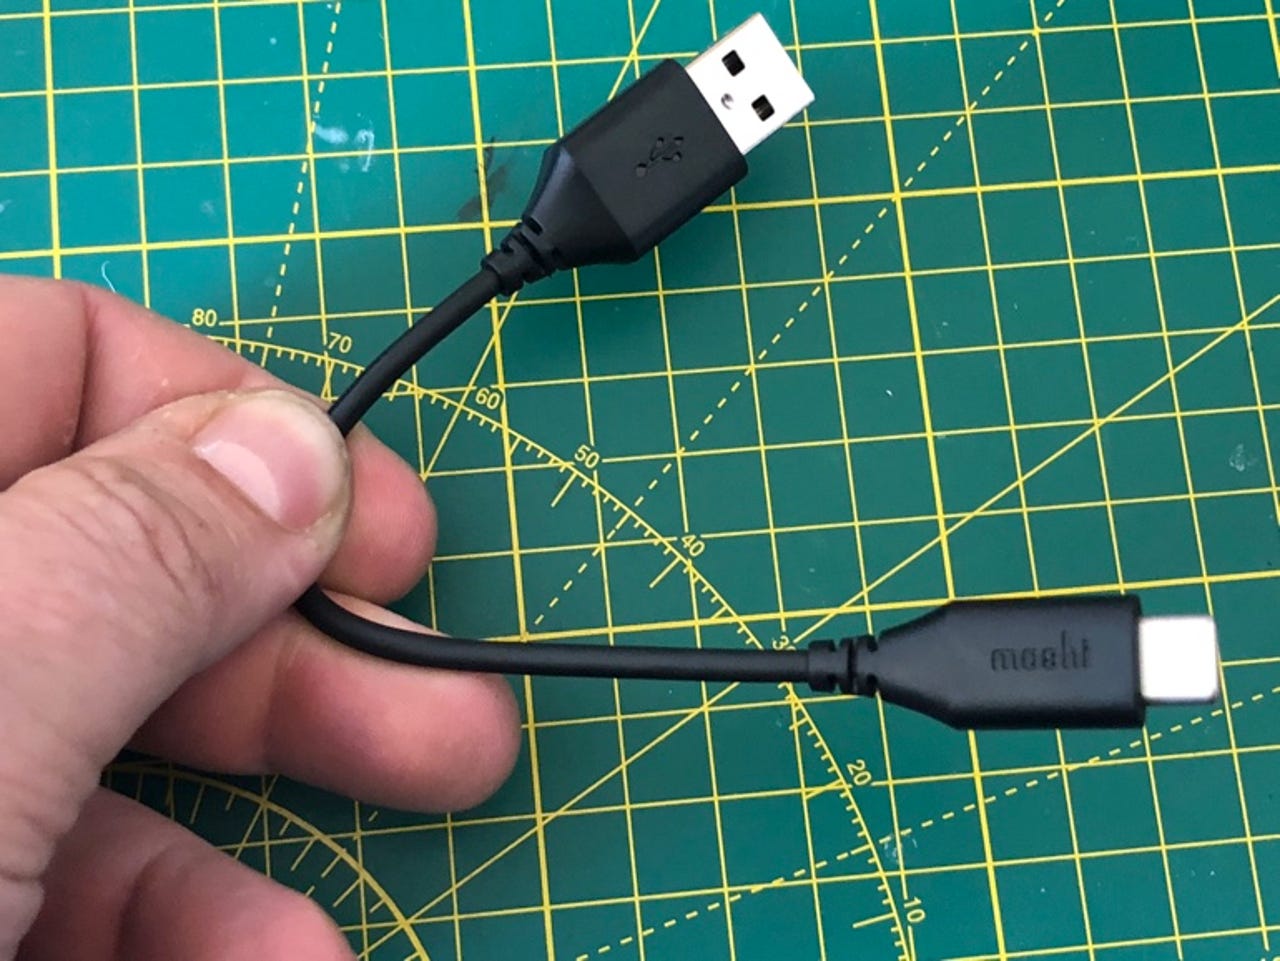 USB-C-to-USB-A cables also everywhere